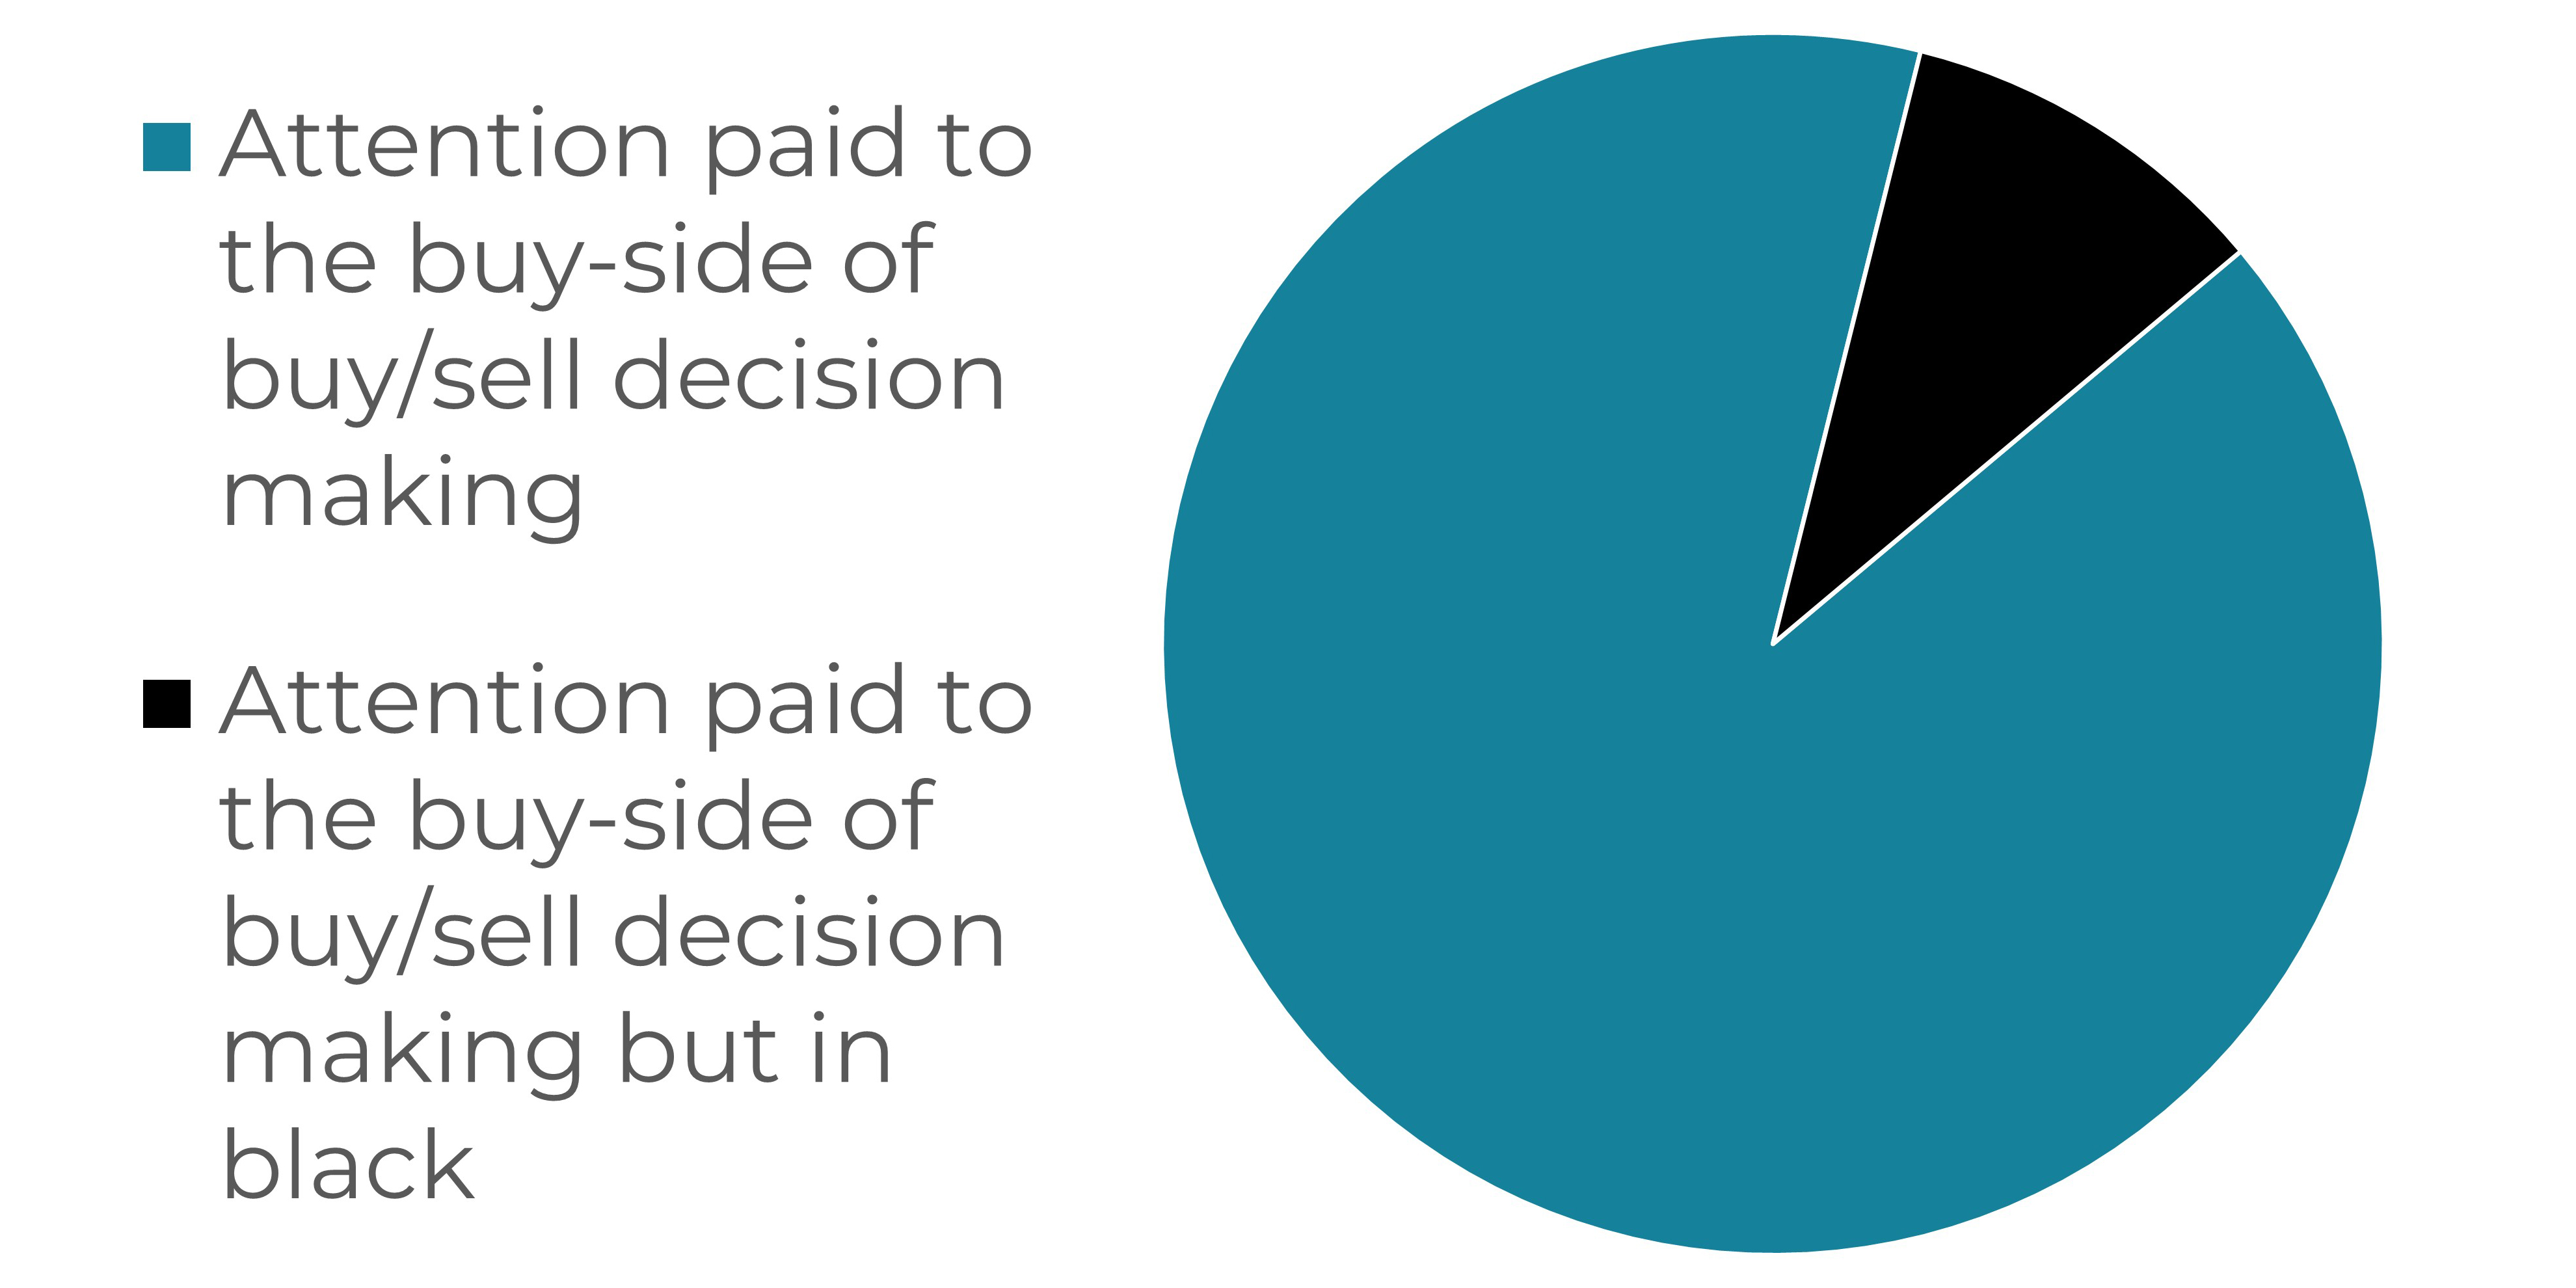 Pie chart of attention paid to the buy-side of buy/sell decision making